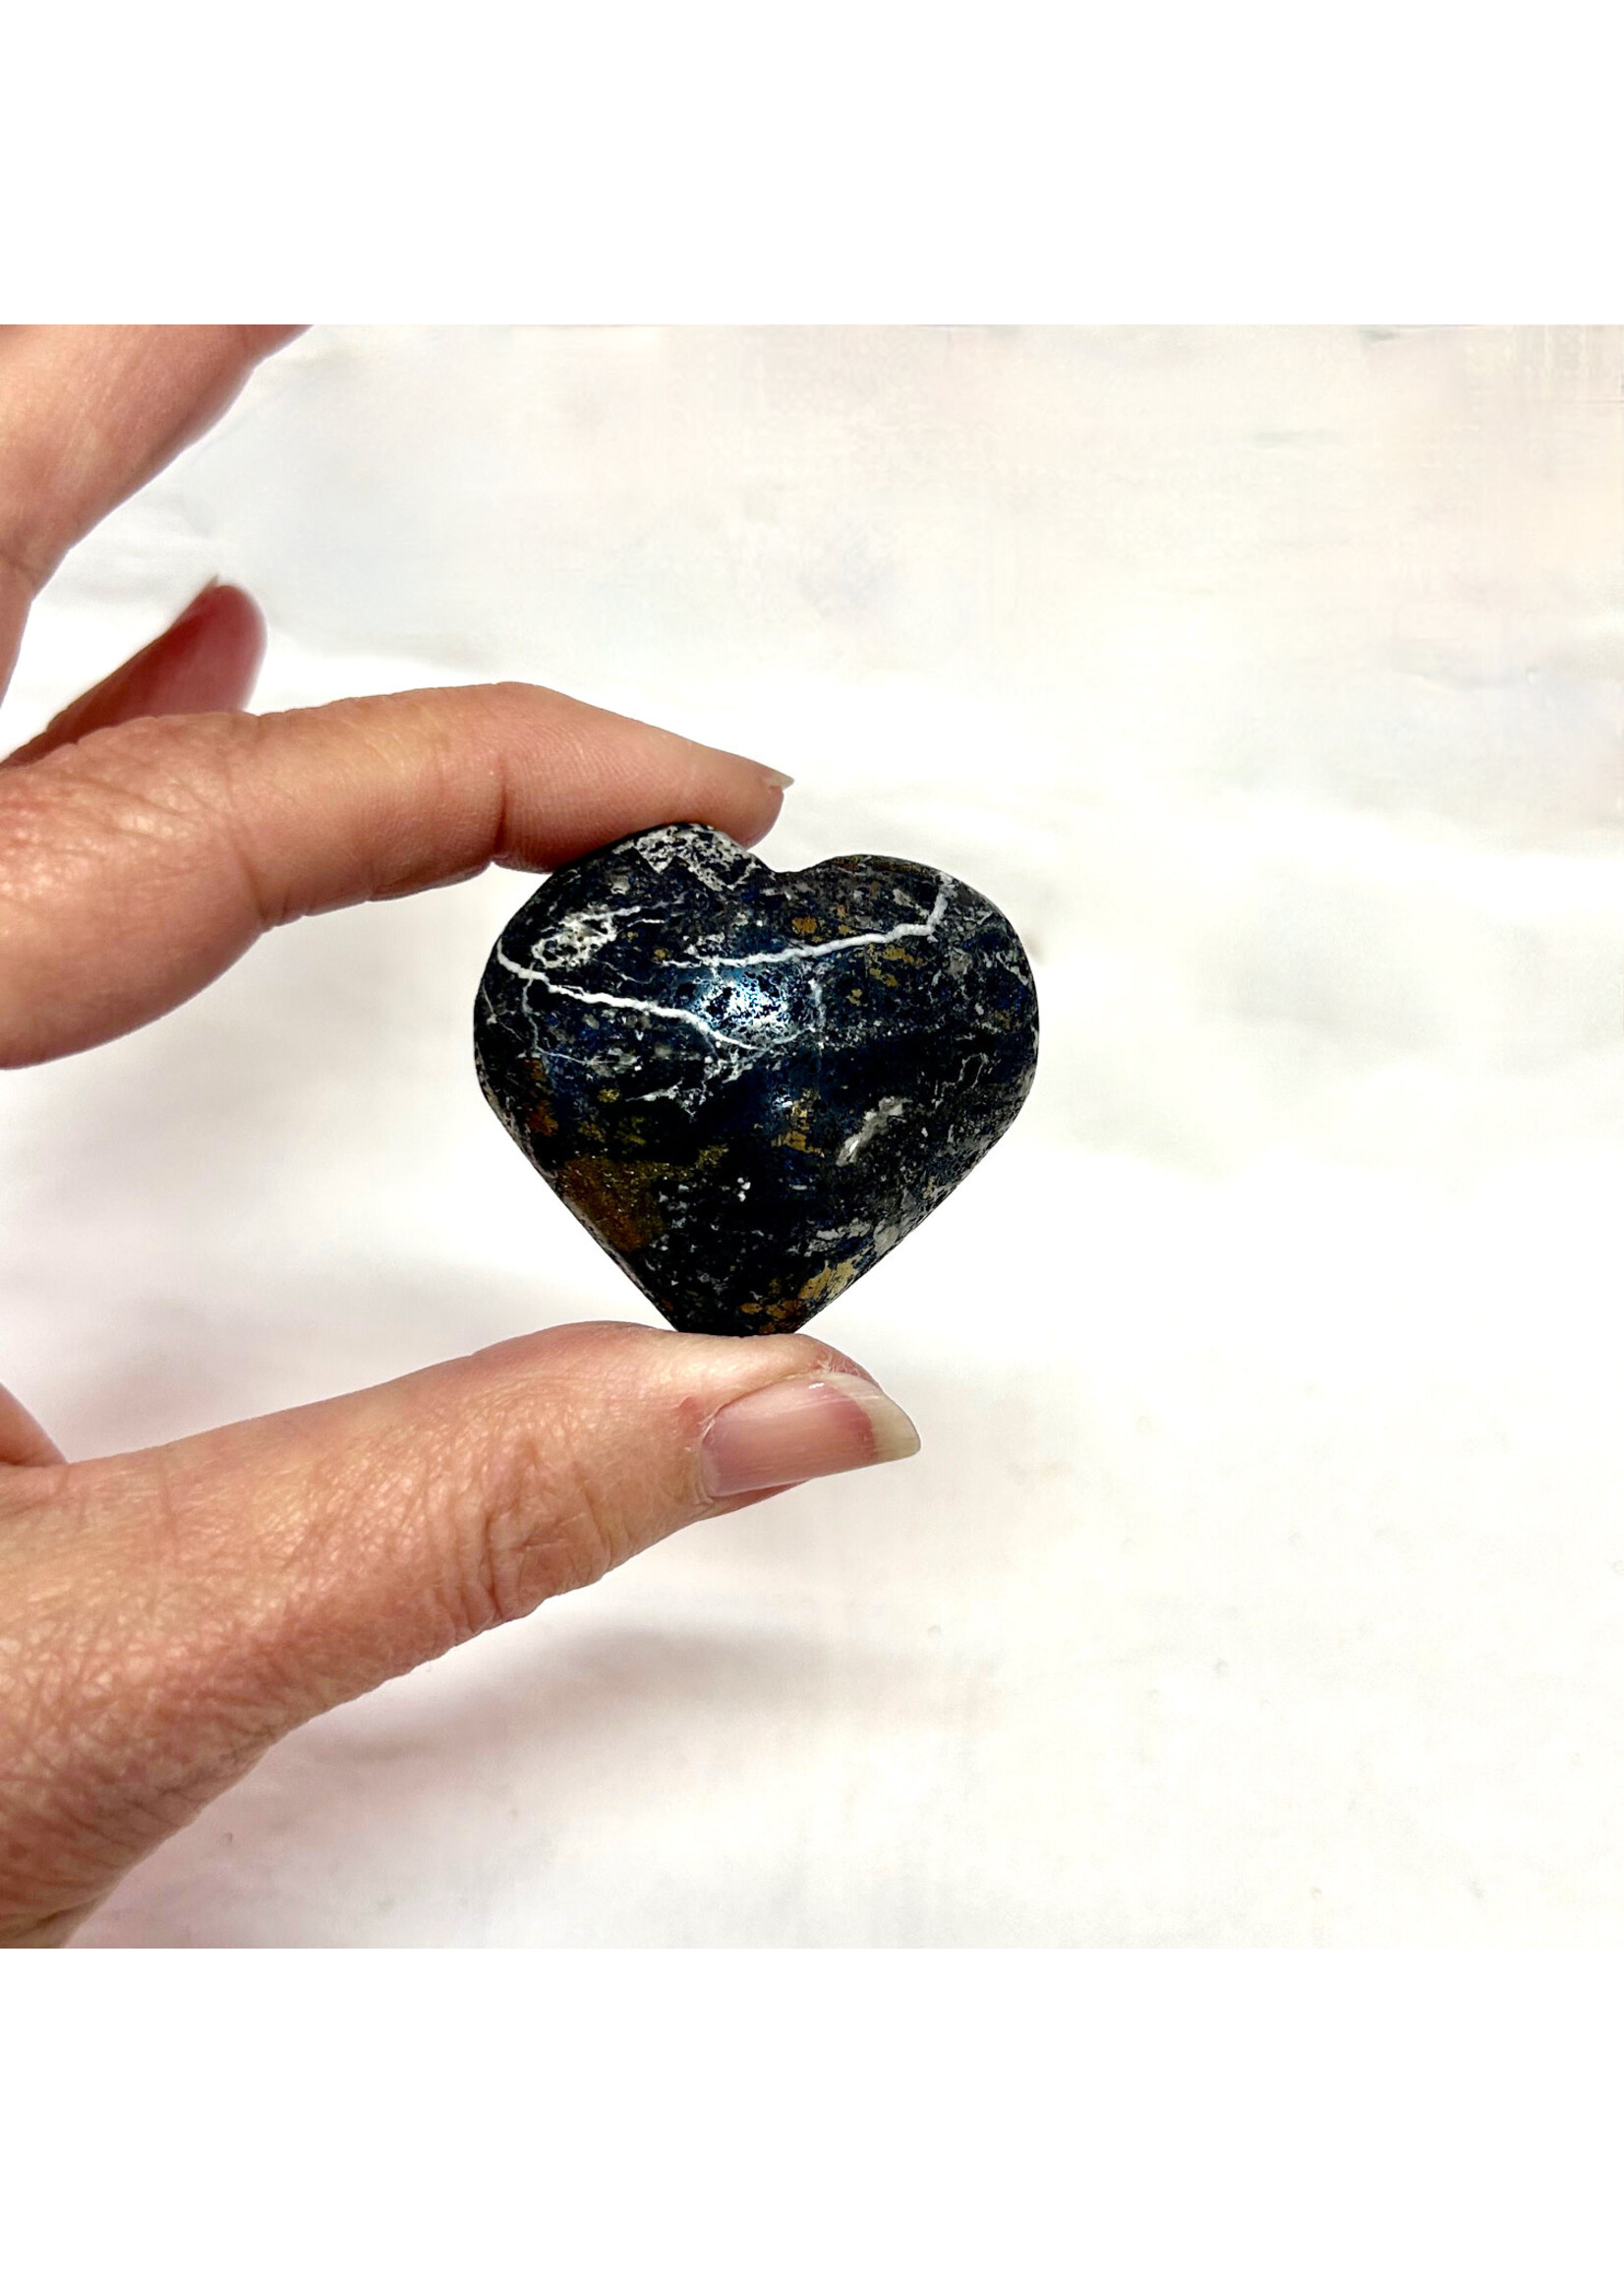 Covellite Hearts for attracting miracles